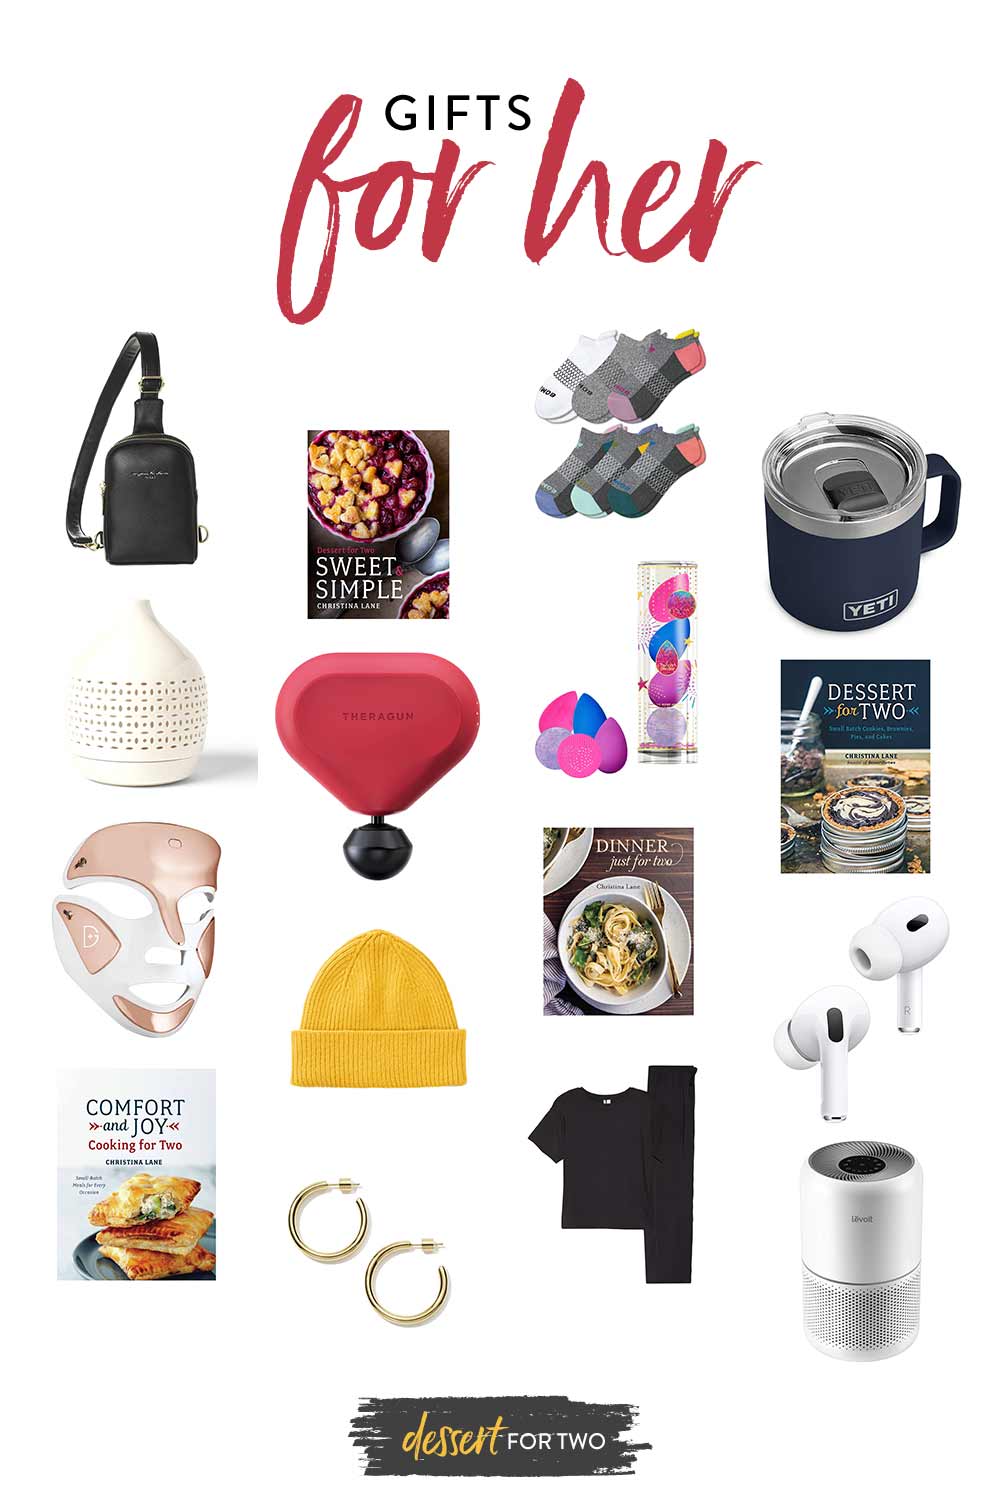 Gifts for Her Ideas Guide - Cute Gift Ideas for Women